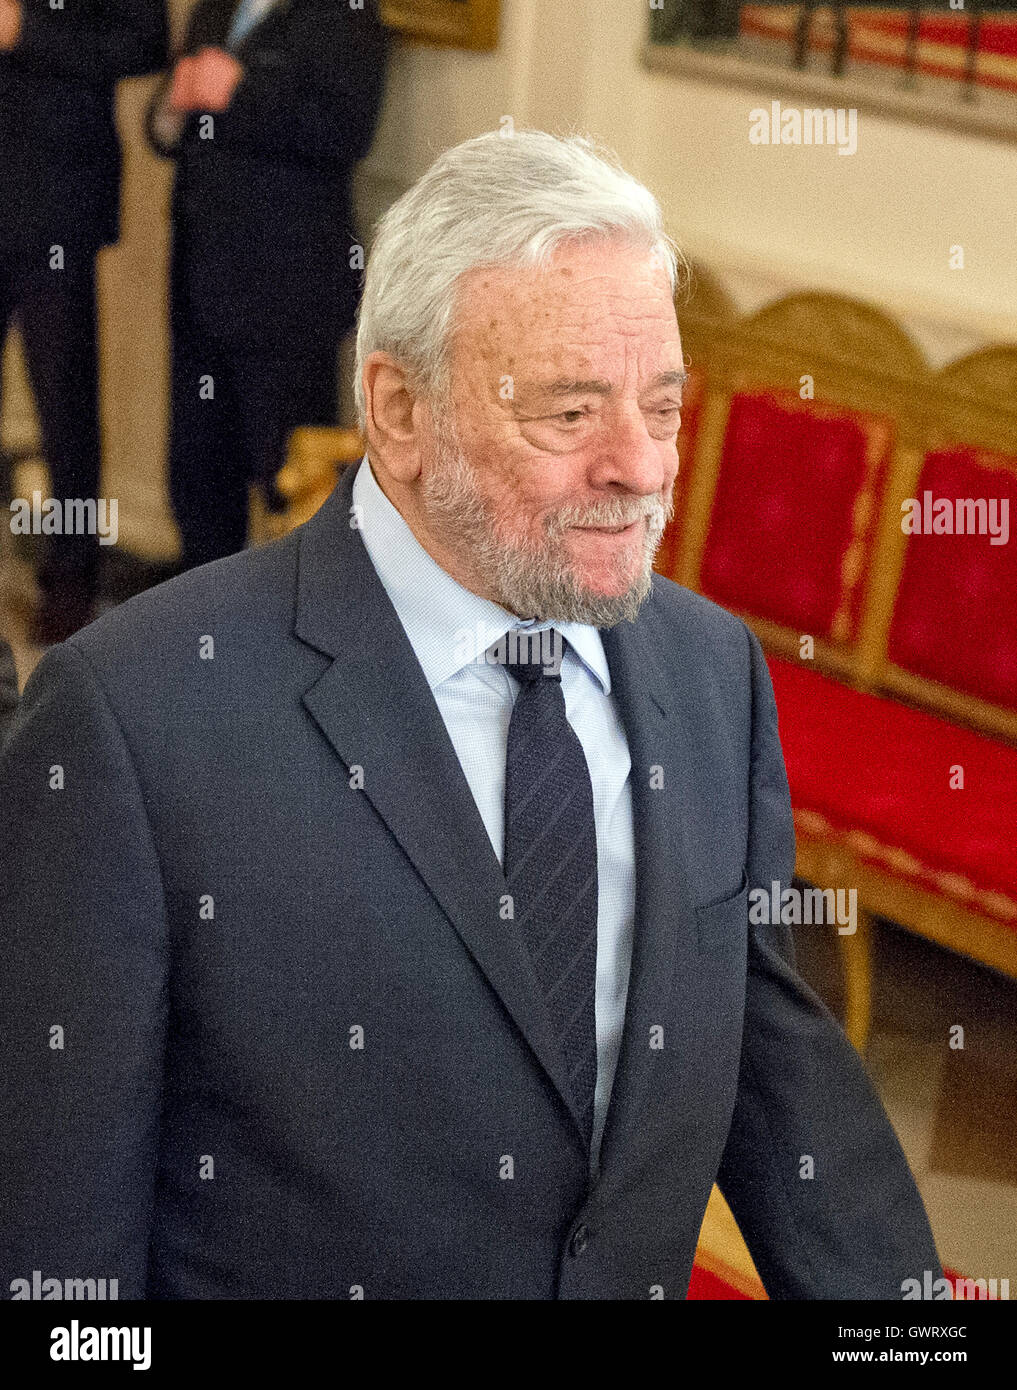 Composer and lyricist Stephen Sondheim arrives to receive the Presidential Medal of Freedom from United States President Barack Obama during a ceremony in the East Room of the White House in Washington, DC on Tuesday, November 24, 2015.  The Medal is the Stock Photo